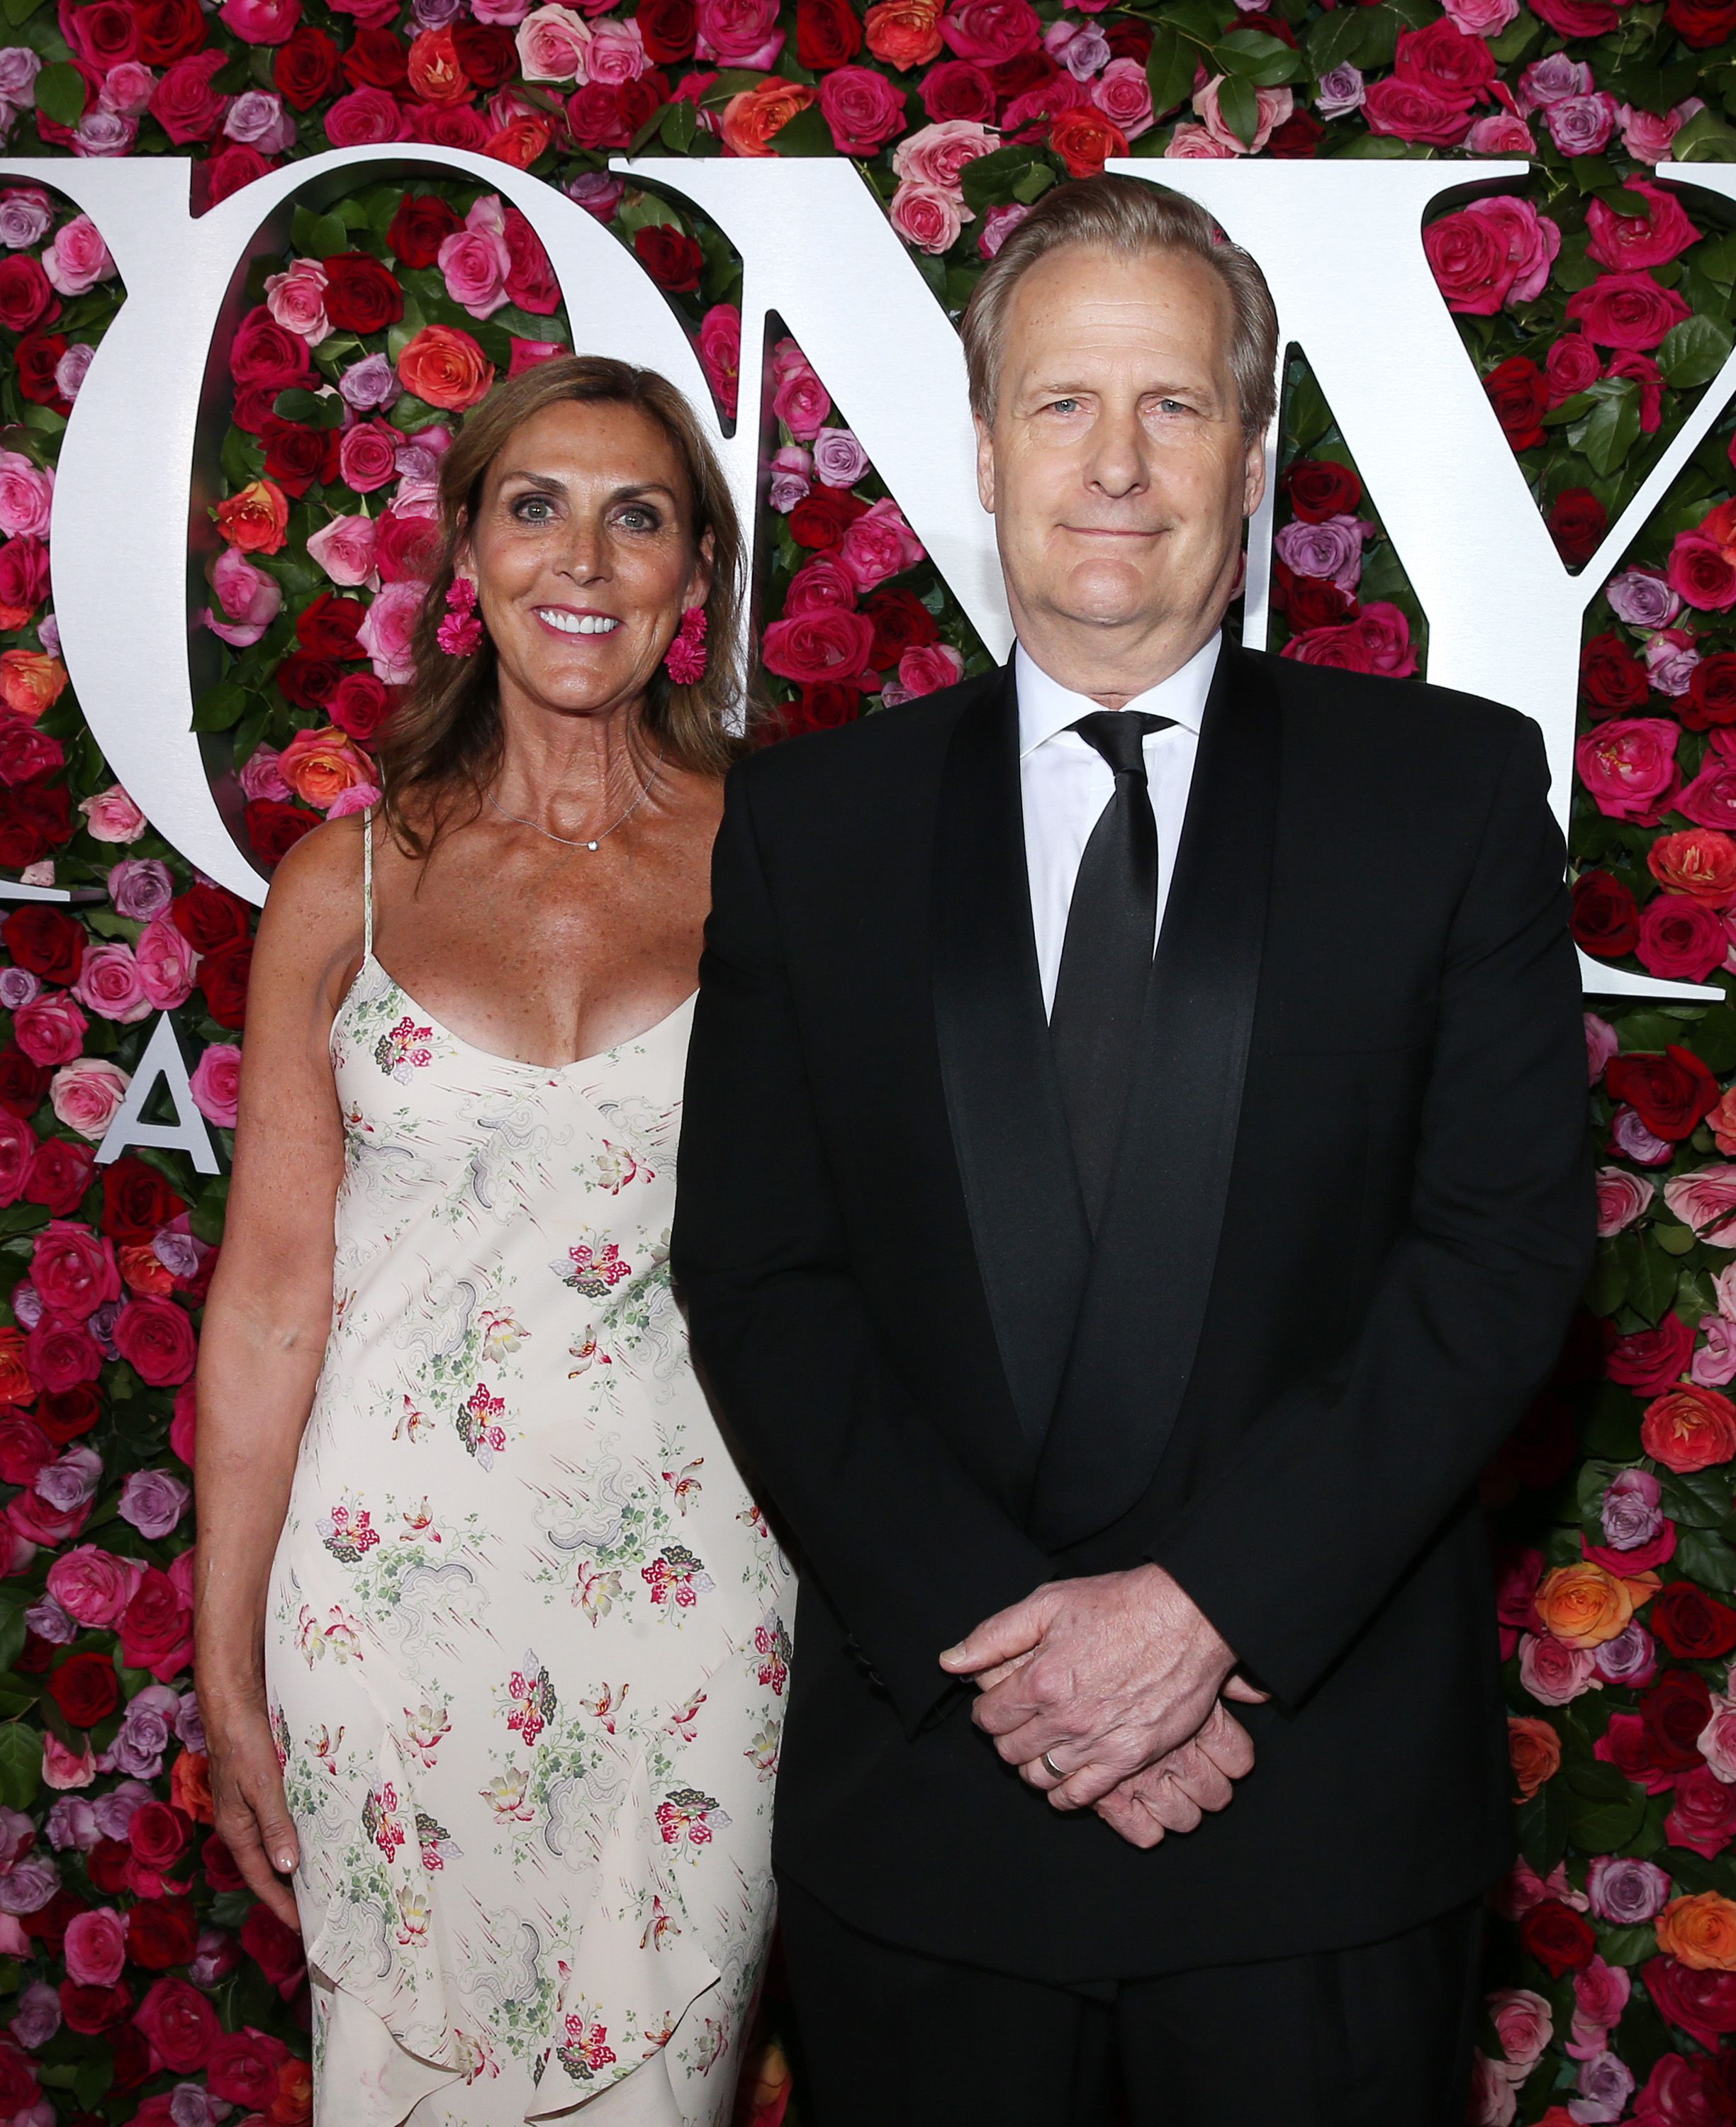 Kathleen Rosemary Treado and Jeff Daniels at the 72nd Annual Tony Awards on June 10, 2018, in New York City. | Source: Jemal Countess/Getty Images